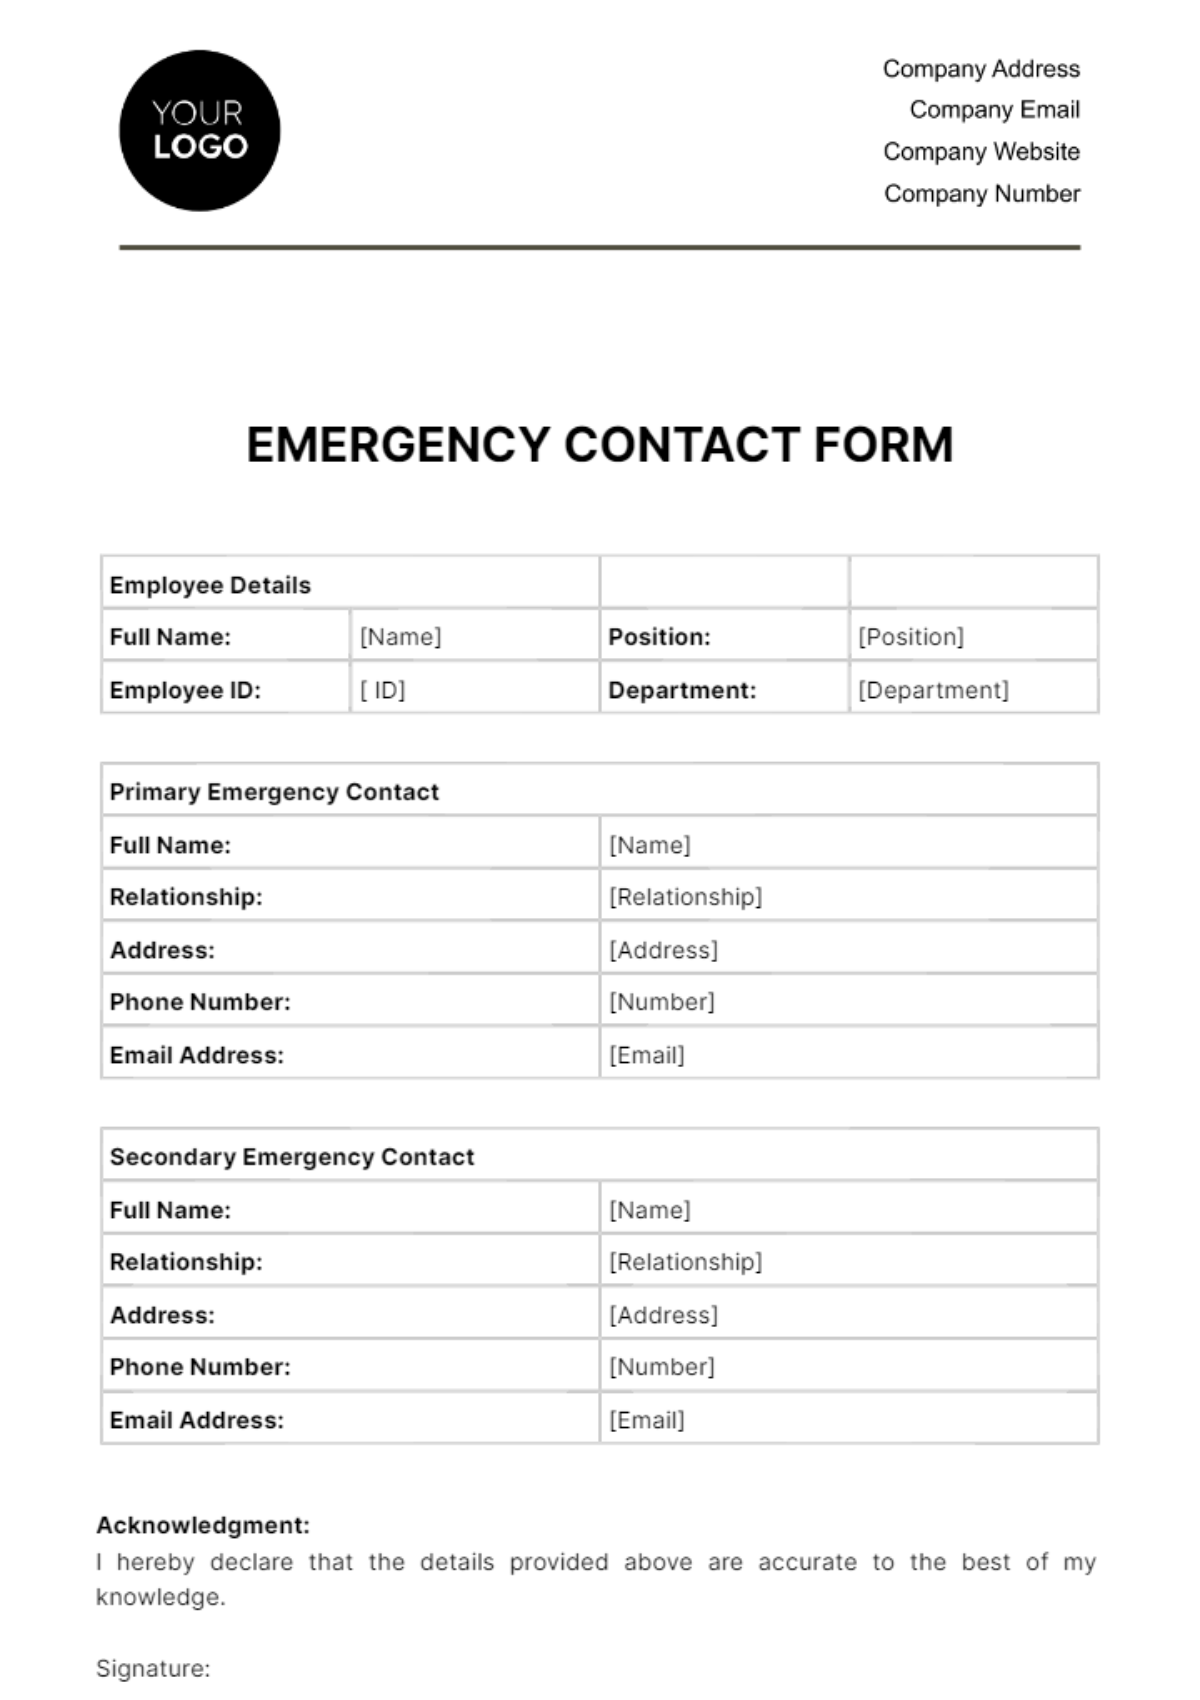 Emergency Contact Form HR Template